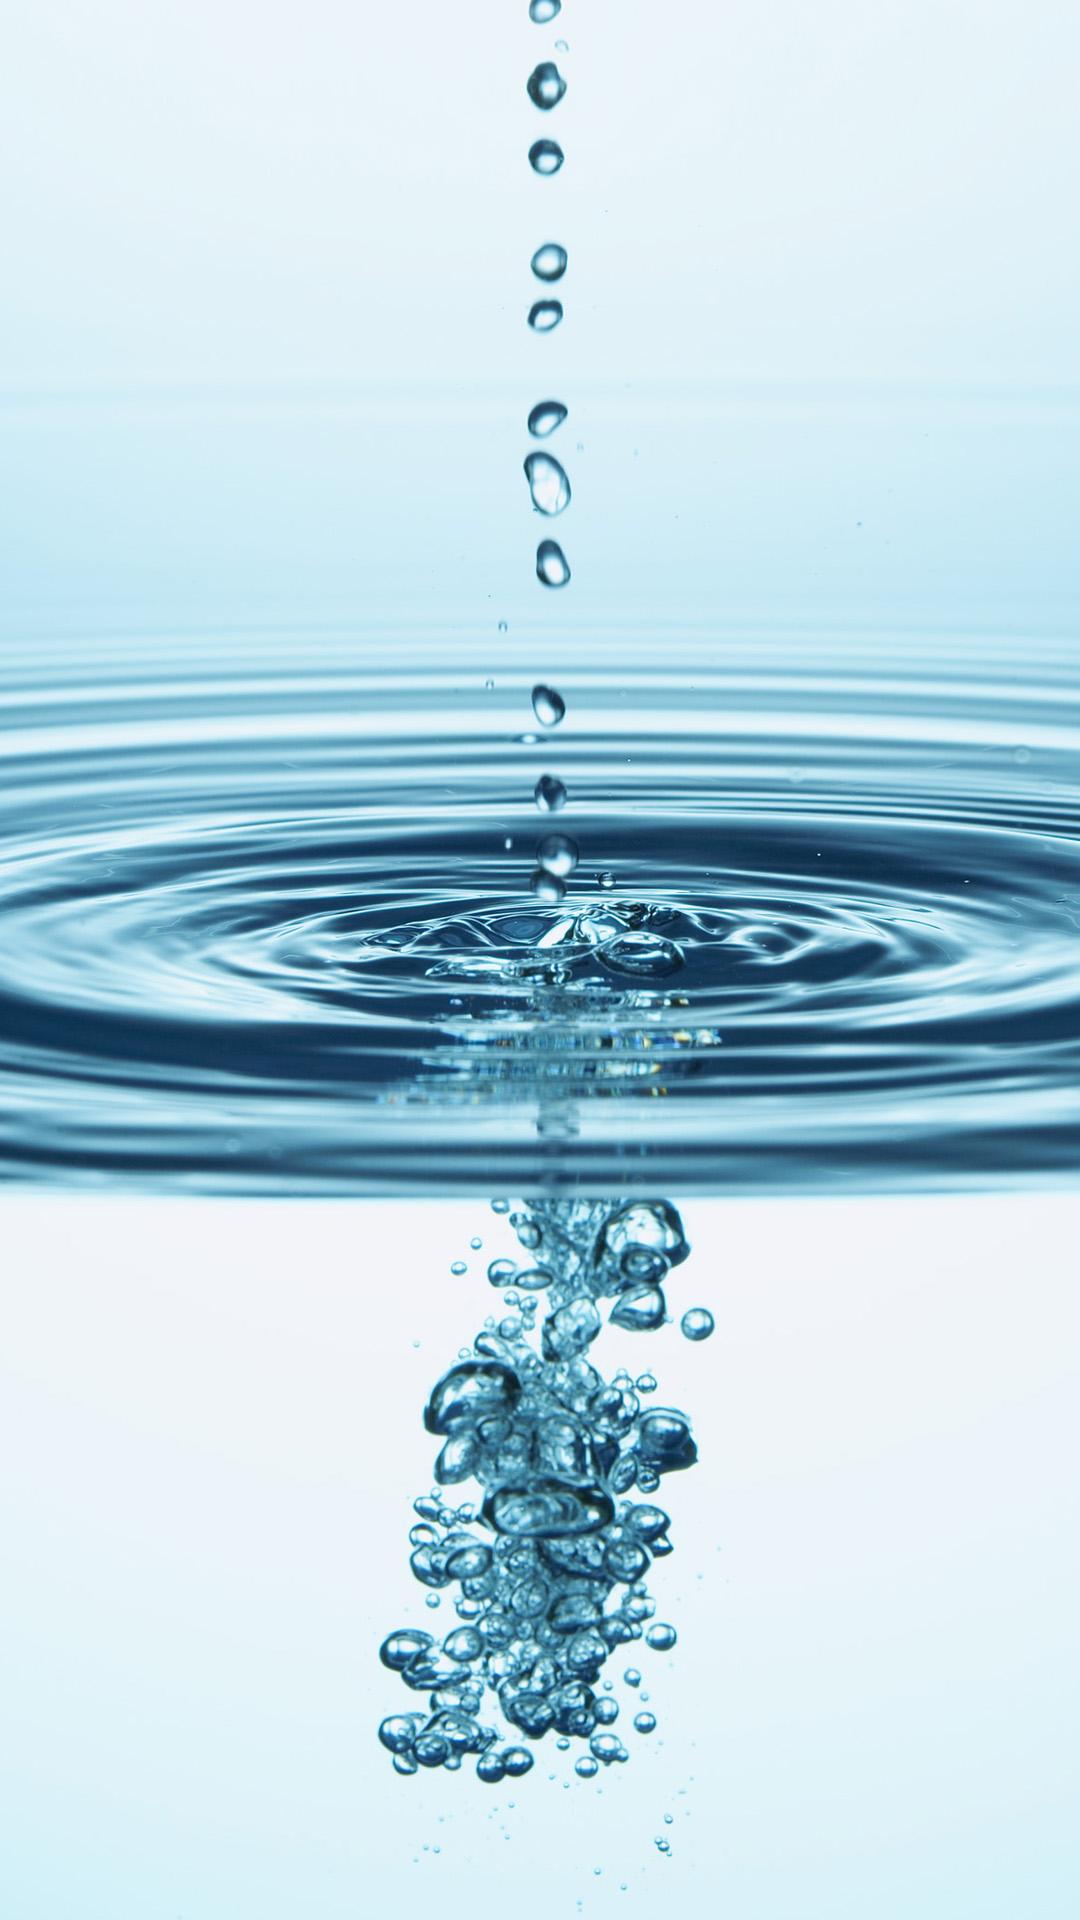 Wallpaper Weekends: Water Droplets for the iPhone 6 Plus